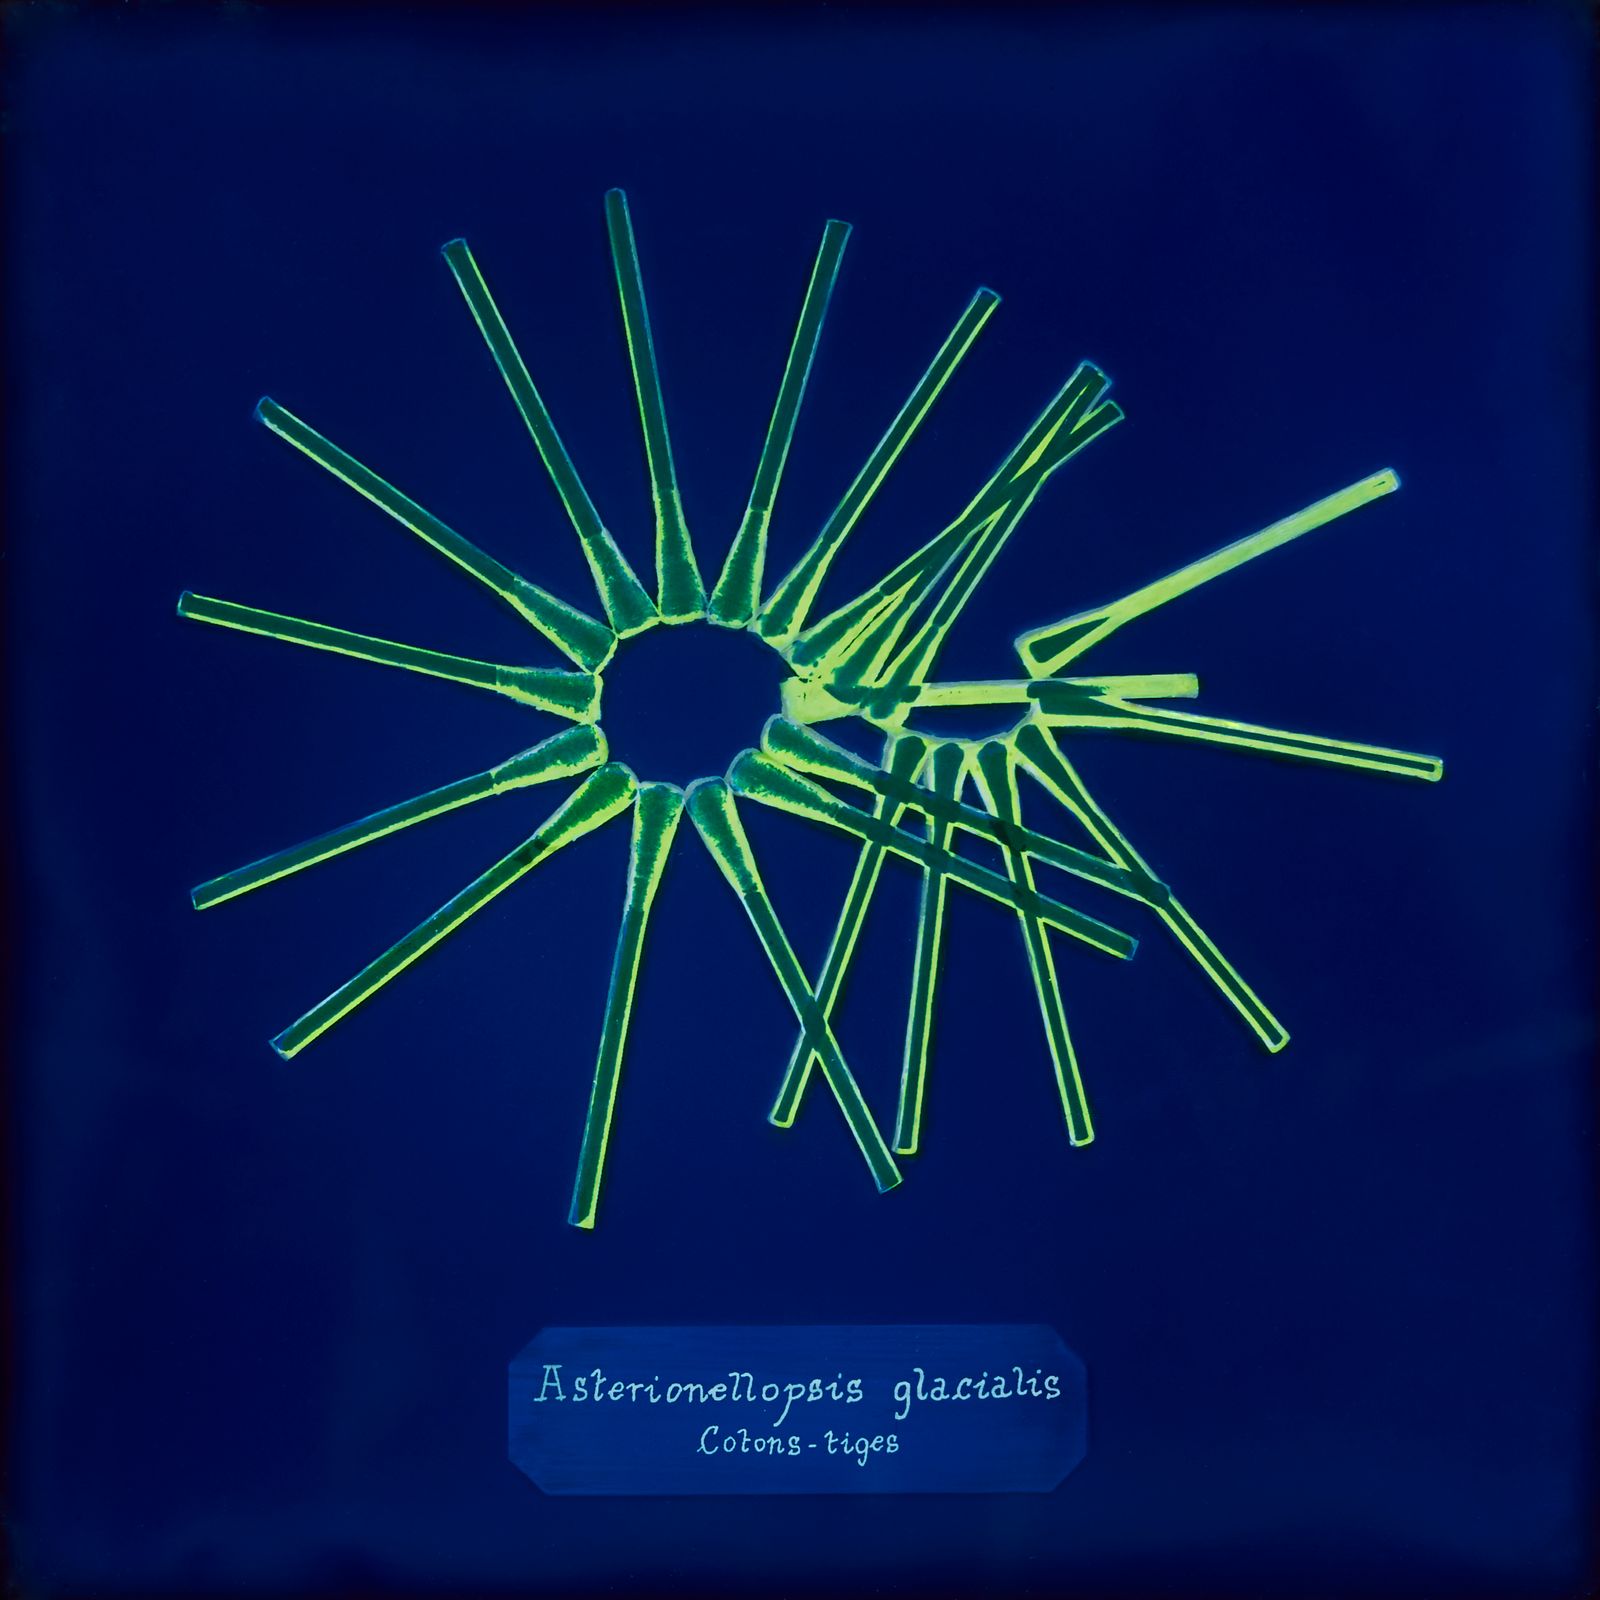 © Manon Lanjouère - cotton buds. cyanotype on glass and fluo vinyl emulsion, 20x20cm